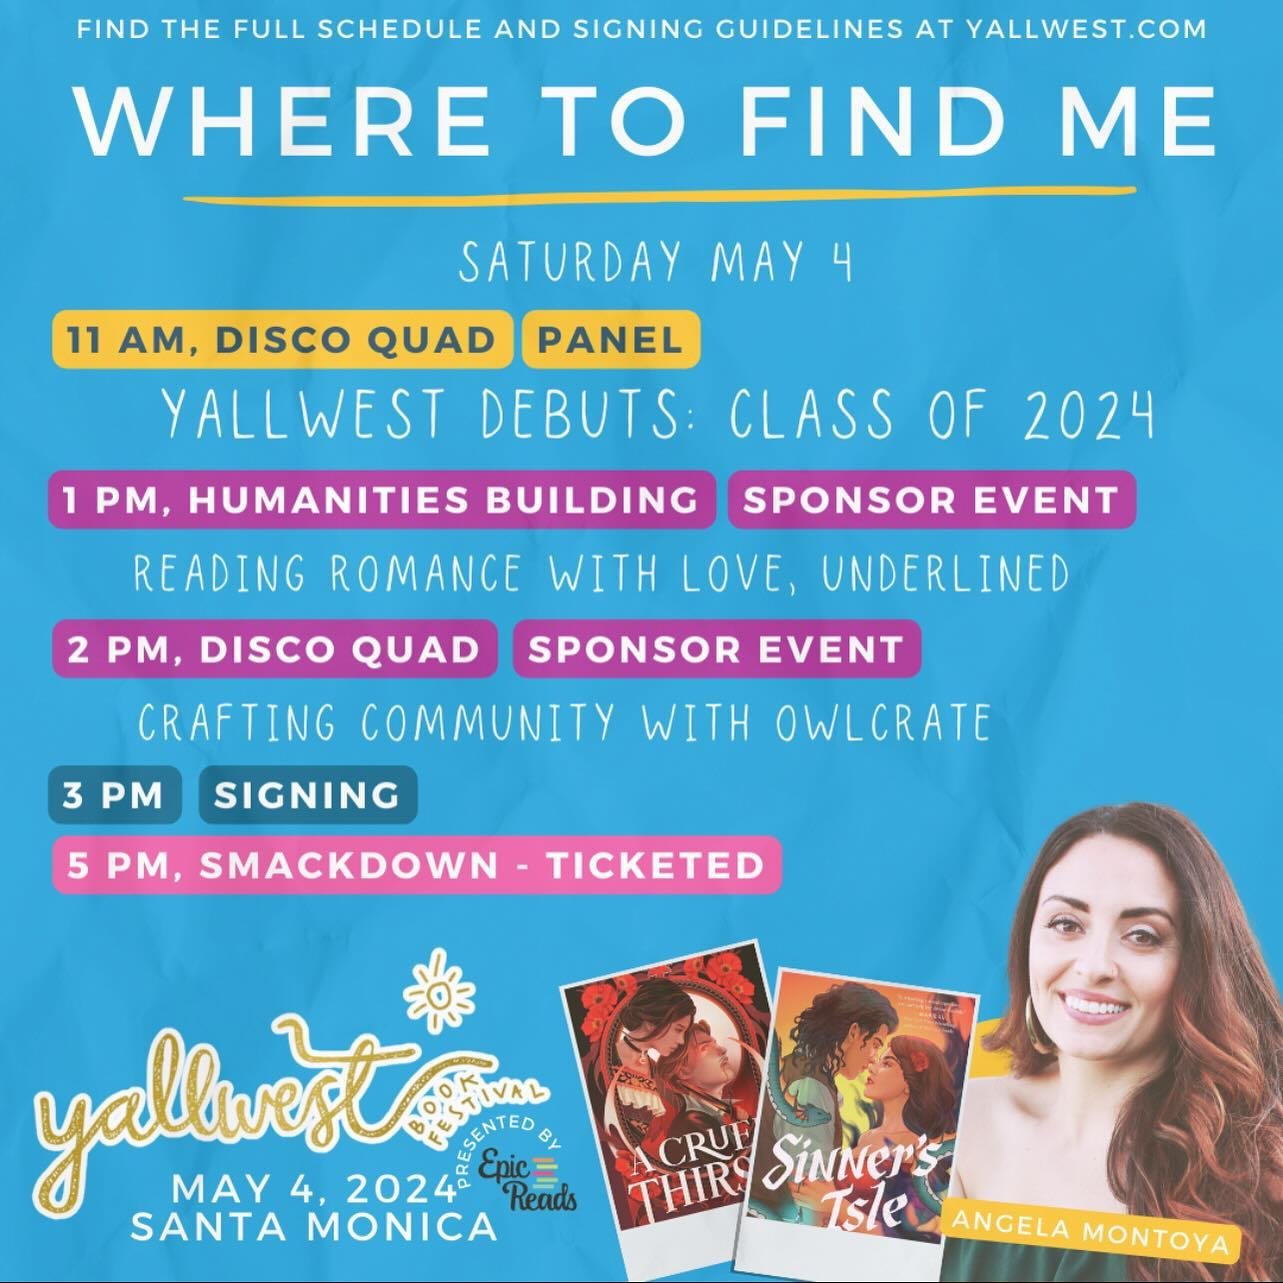 Raise your hand if you&rsquo;re going to @yallwest 

Here&rsquo;s where you can find me on Saturday.

It&rsquo;s going to be a very busy day! I can&rsquo;t wait!!!!!

#yallwest #bookish #yaauthorsofinstagram #yaauthor #yaauthors #yabooks